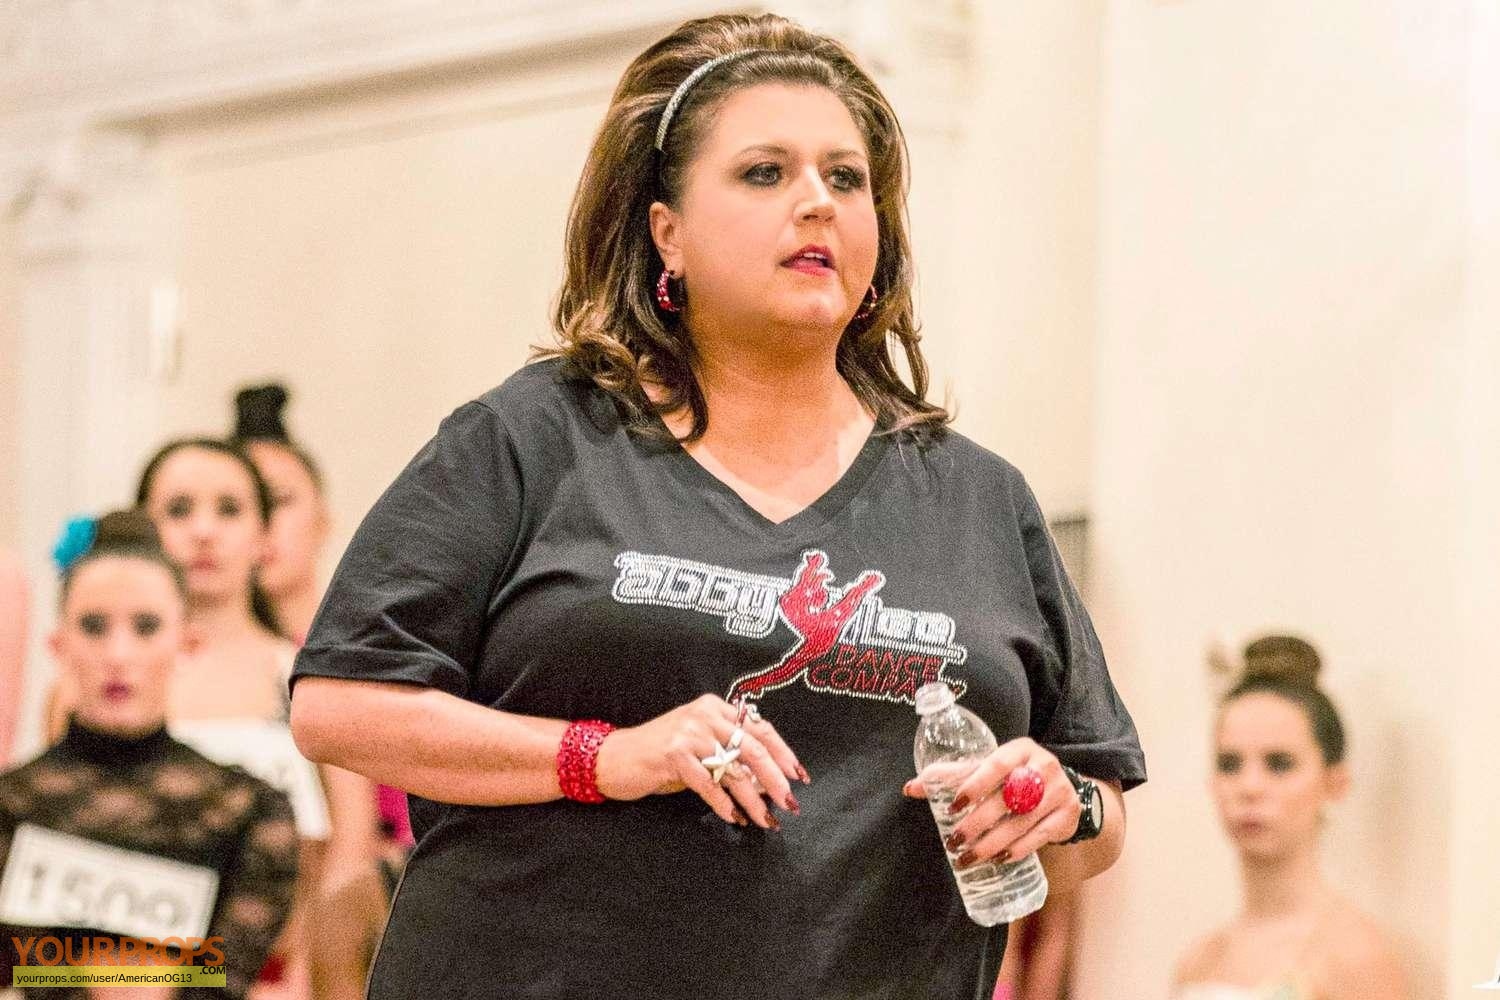 Dance Moms 2011 8 Abby Lee Dance Co Shirts Worn by Abby Lee Miller original  TV series costume